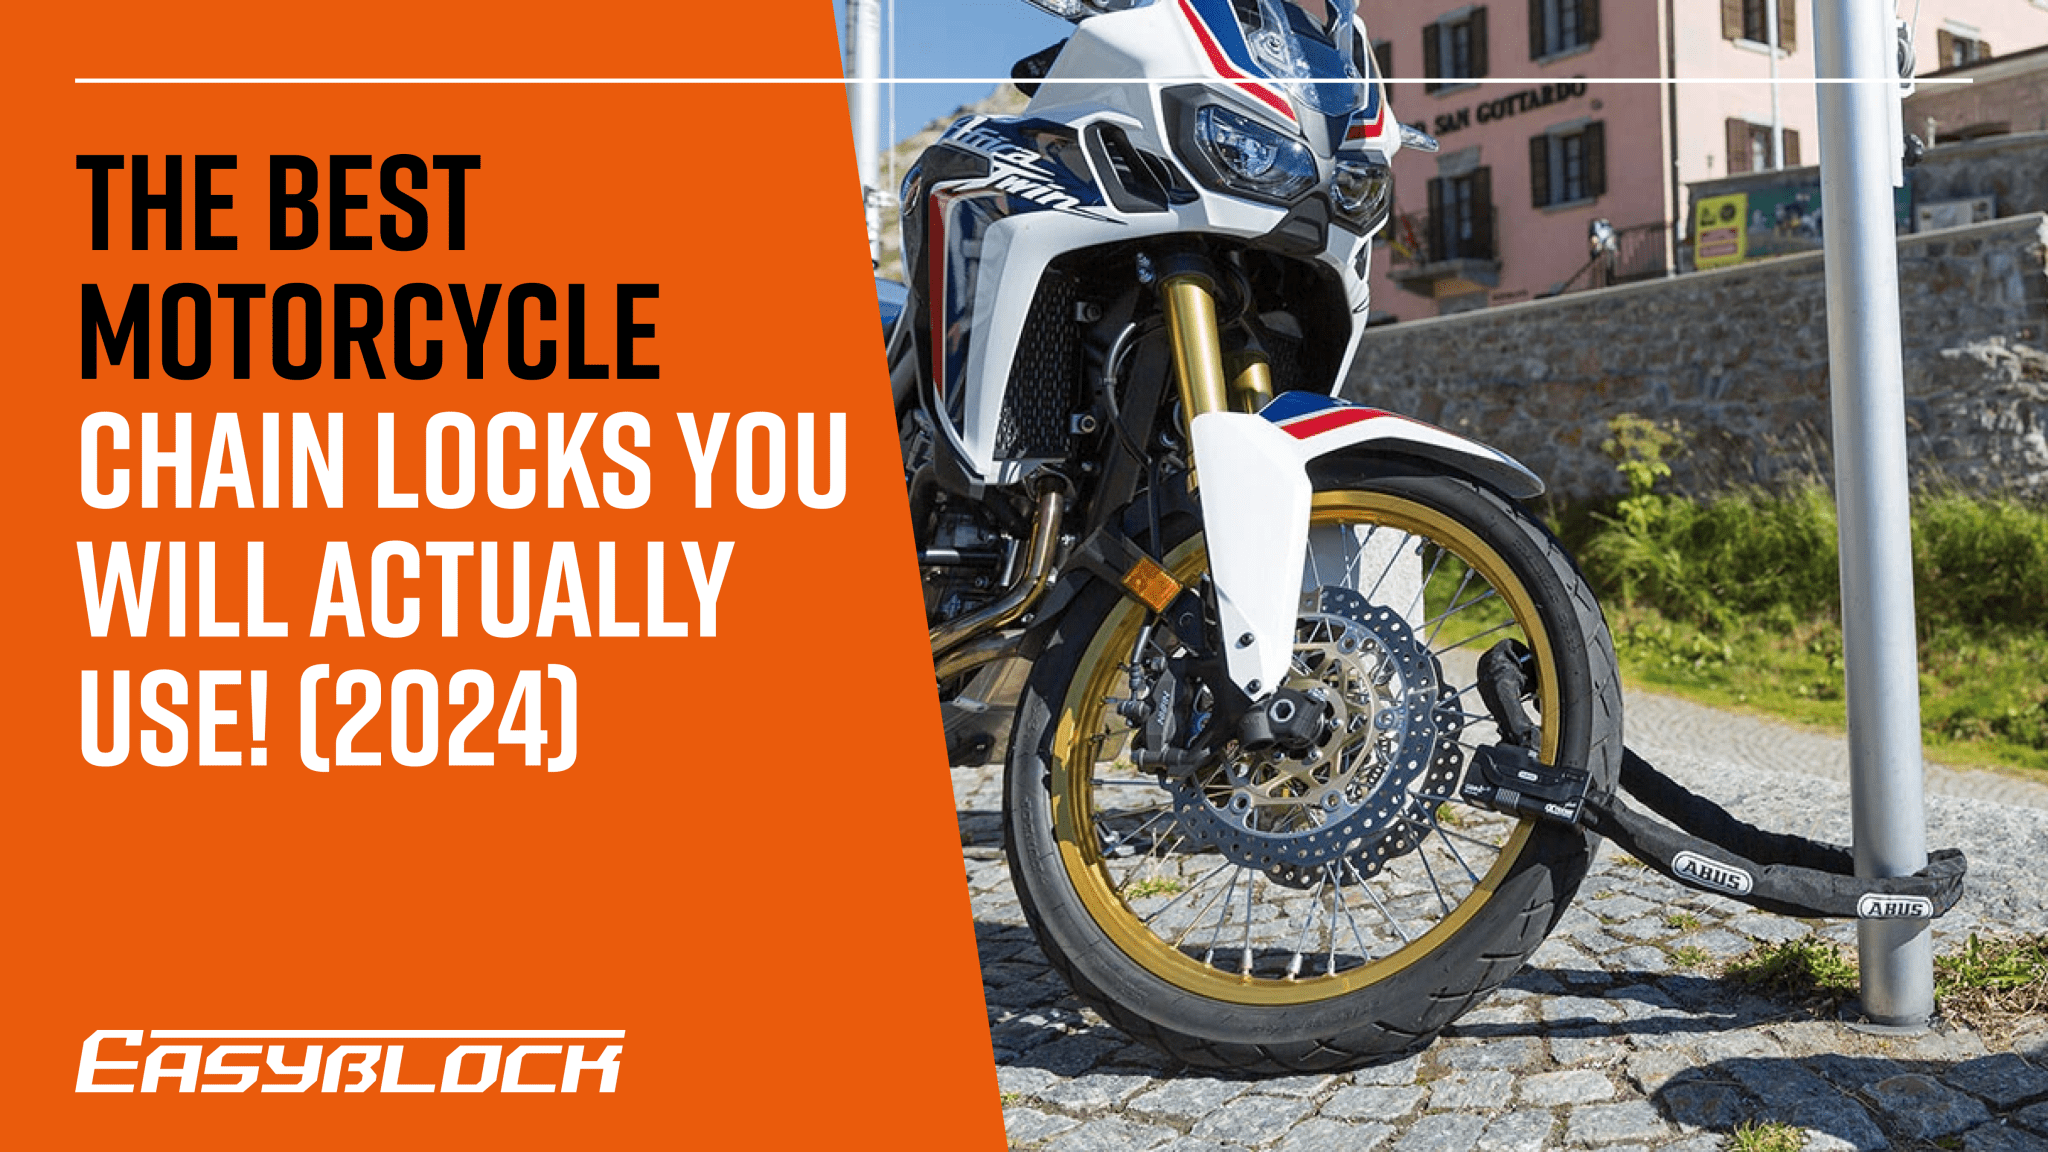 The Best Motorcycle Chain Locks You Will Actually Use! (2024)